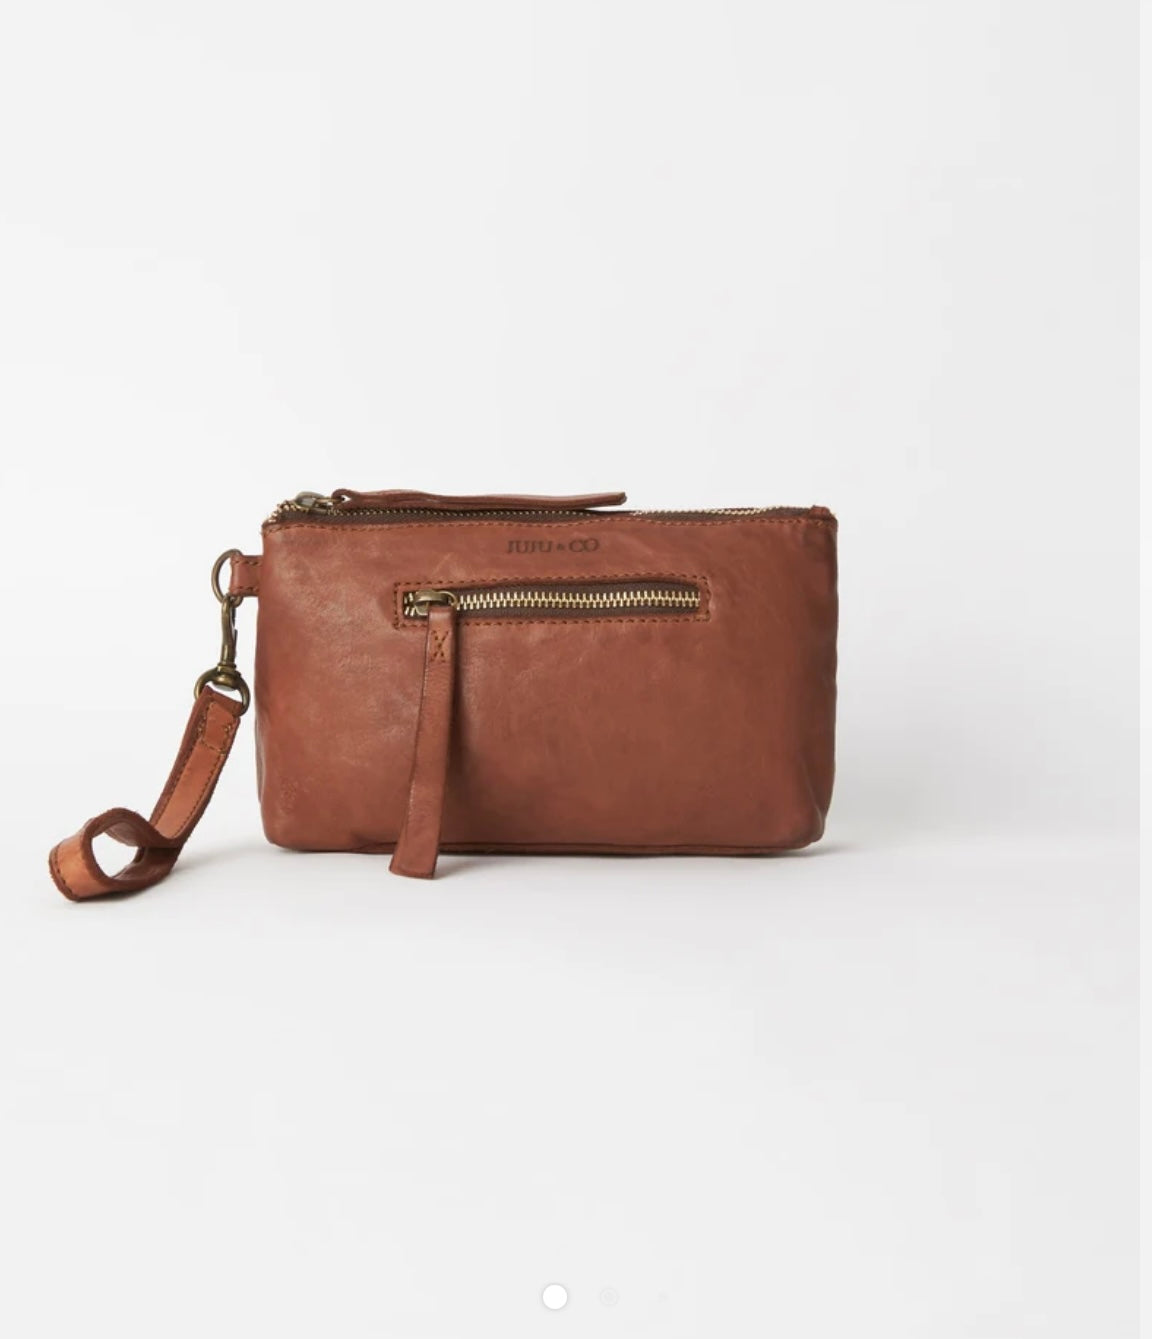 Juju & Co Small Essential Pouch